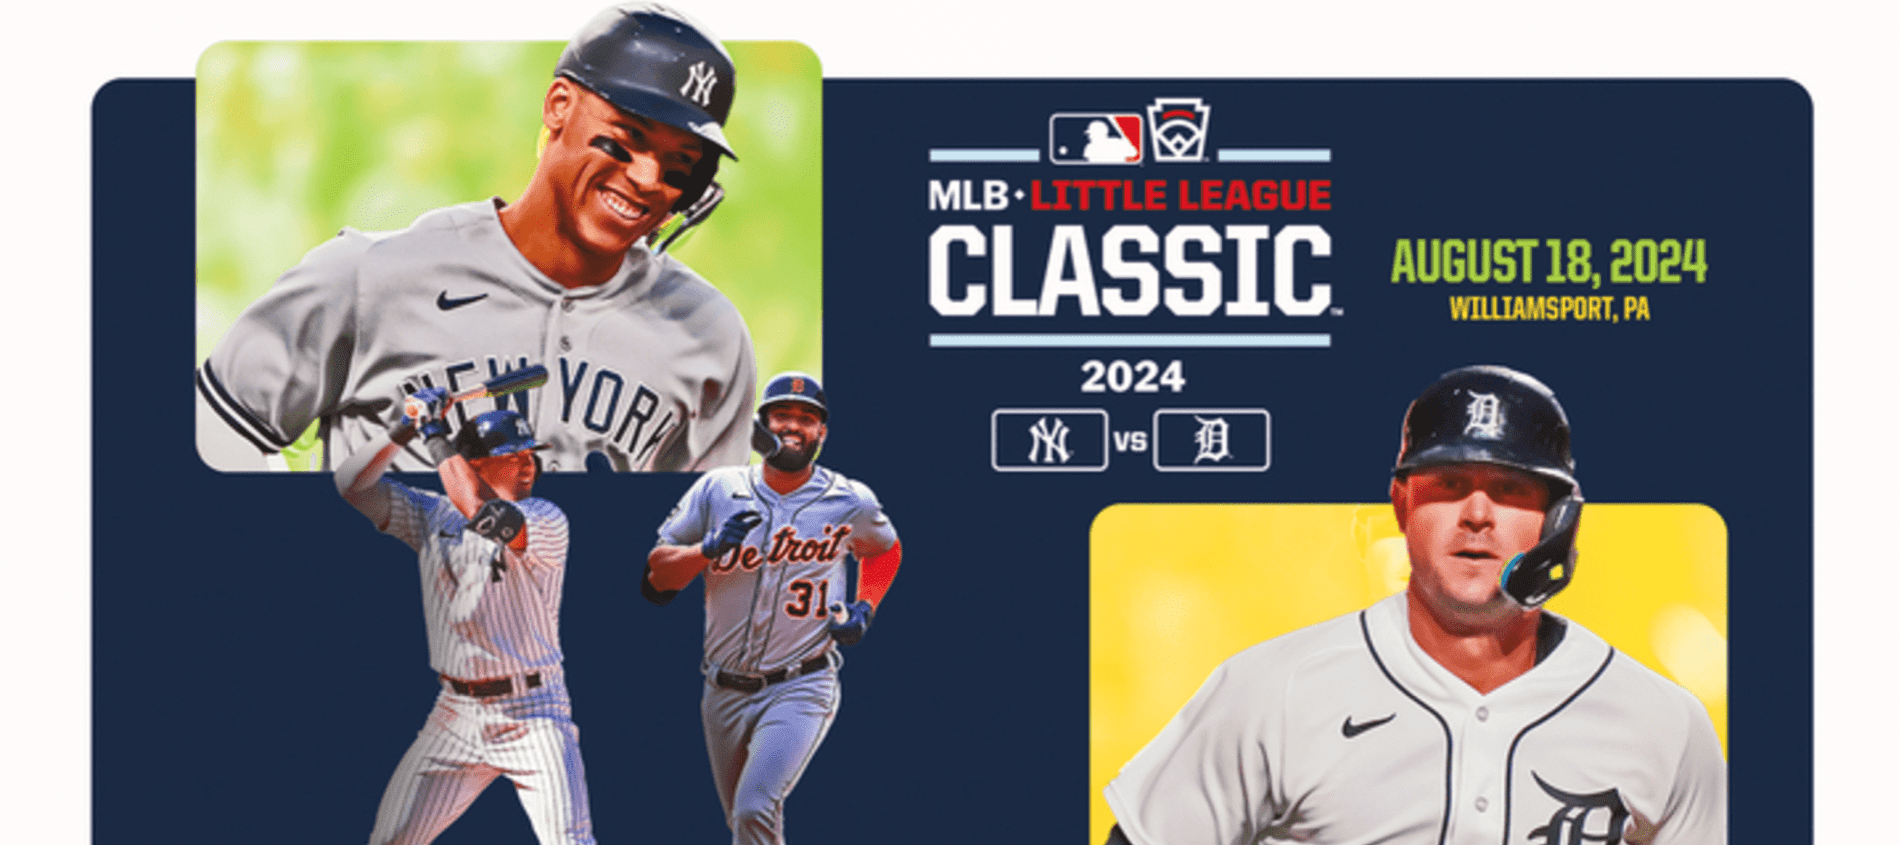 Pirates, Cubs to Play in 2019 MLB Little League Classic presented